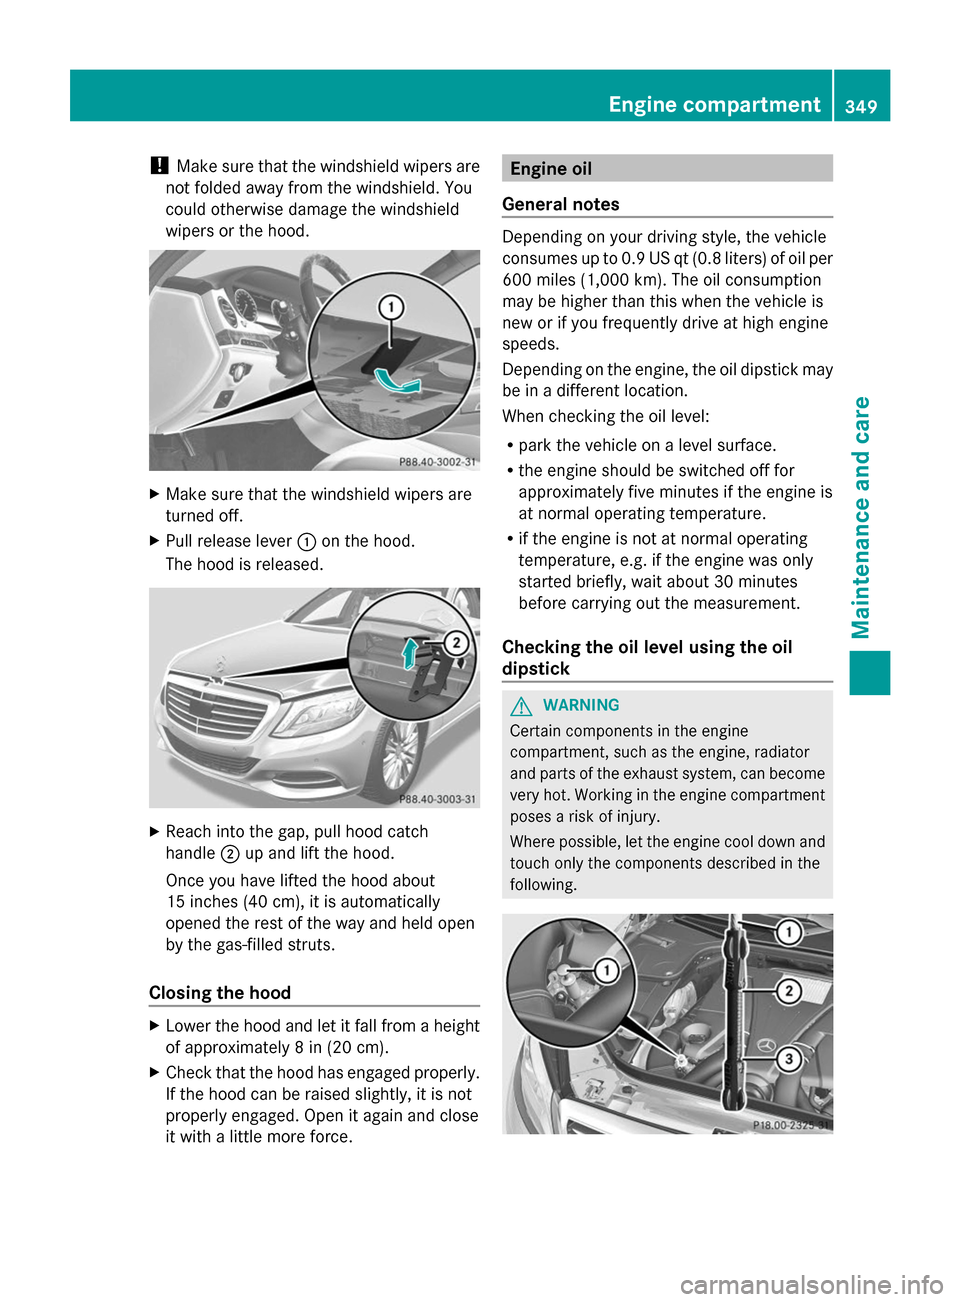 MERCEDES-BENZ S-Class 2014 W222 Owners Manual !
Make sure that the windshield wipers are
not folded away from the windshield. You
could otherwise damage the windshield
wipers or the hood. X
Make sure that the windshield wipers are
turned off.
X P